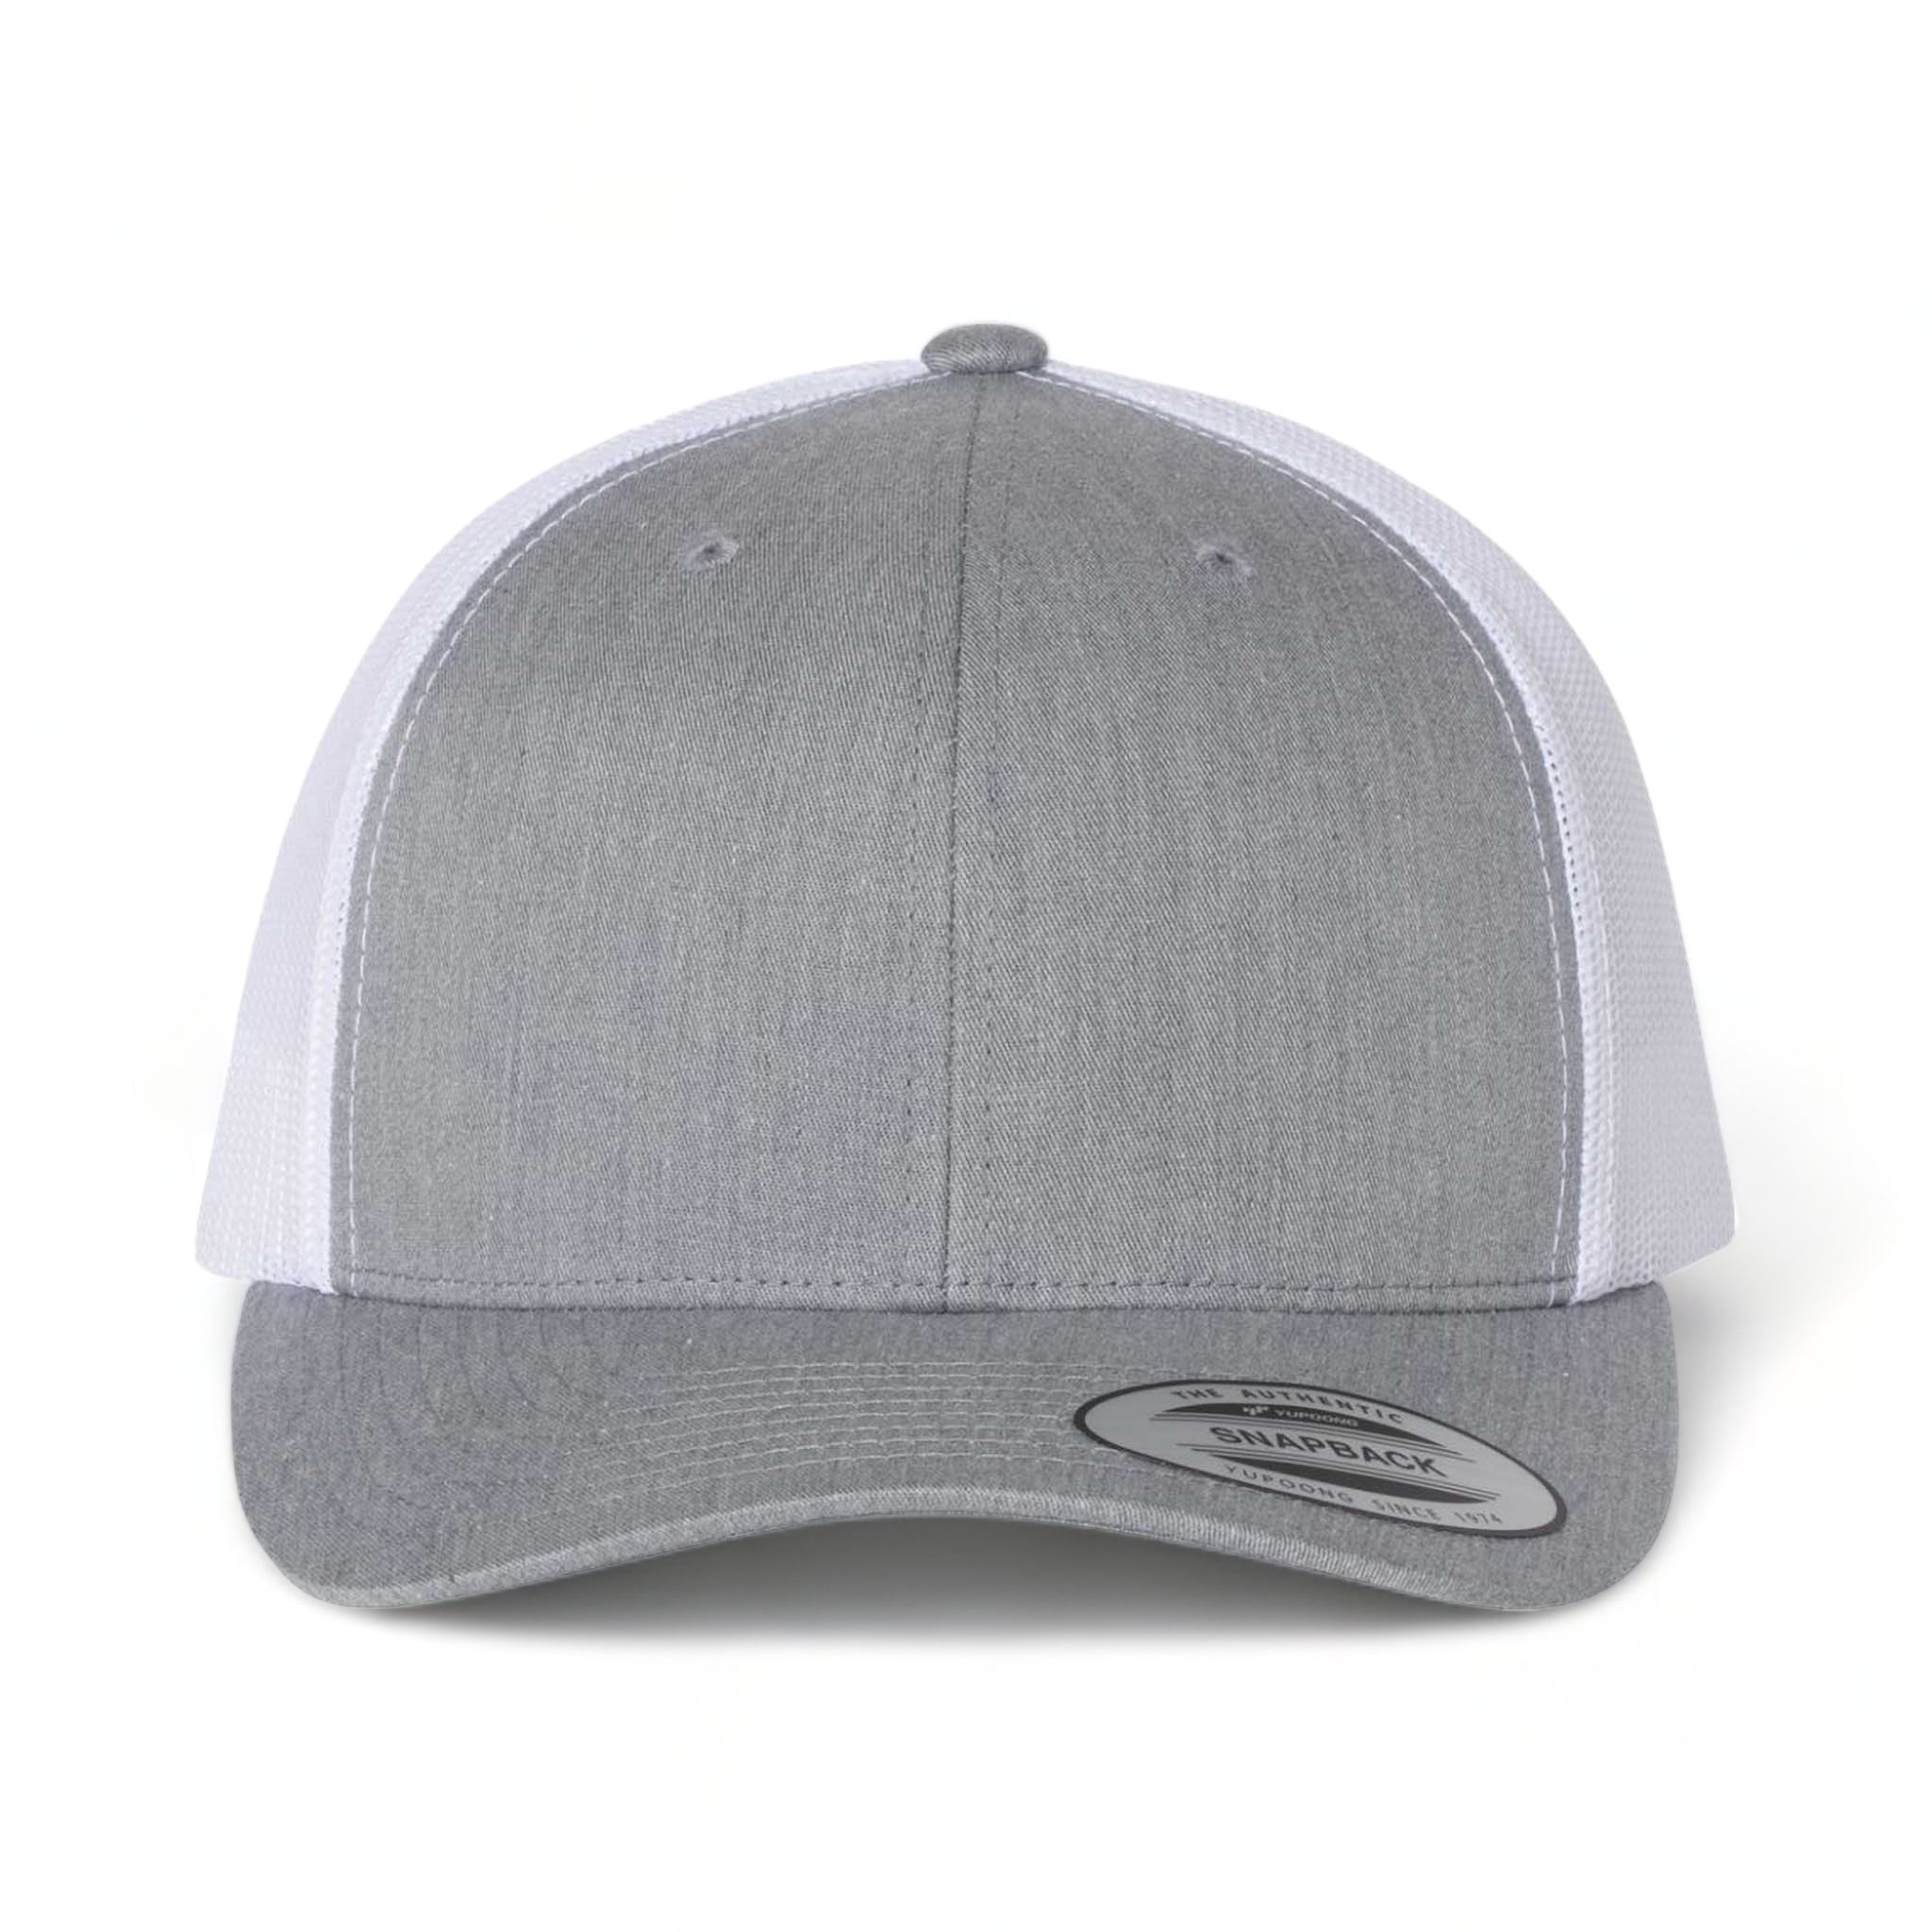 Front view of YP Classics 6606 custom hat in heather grey and white